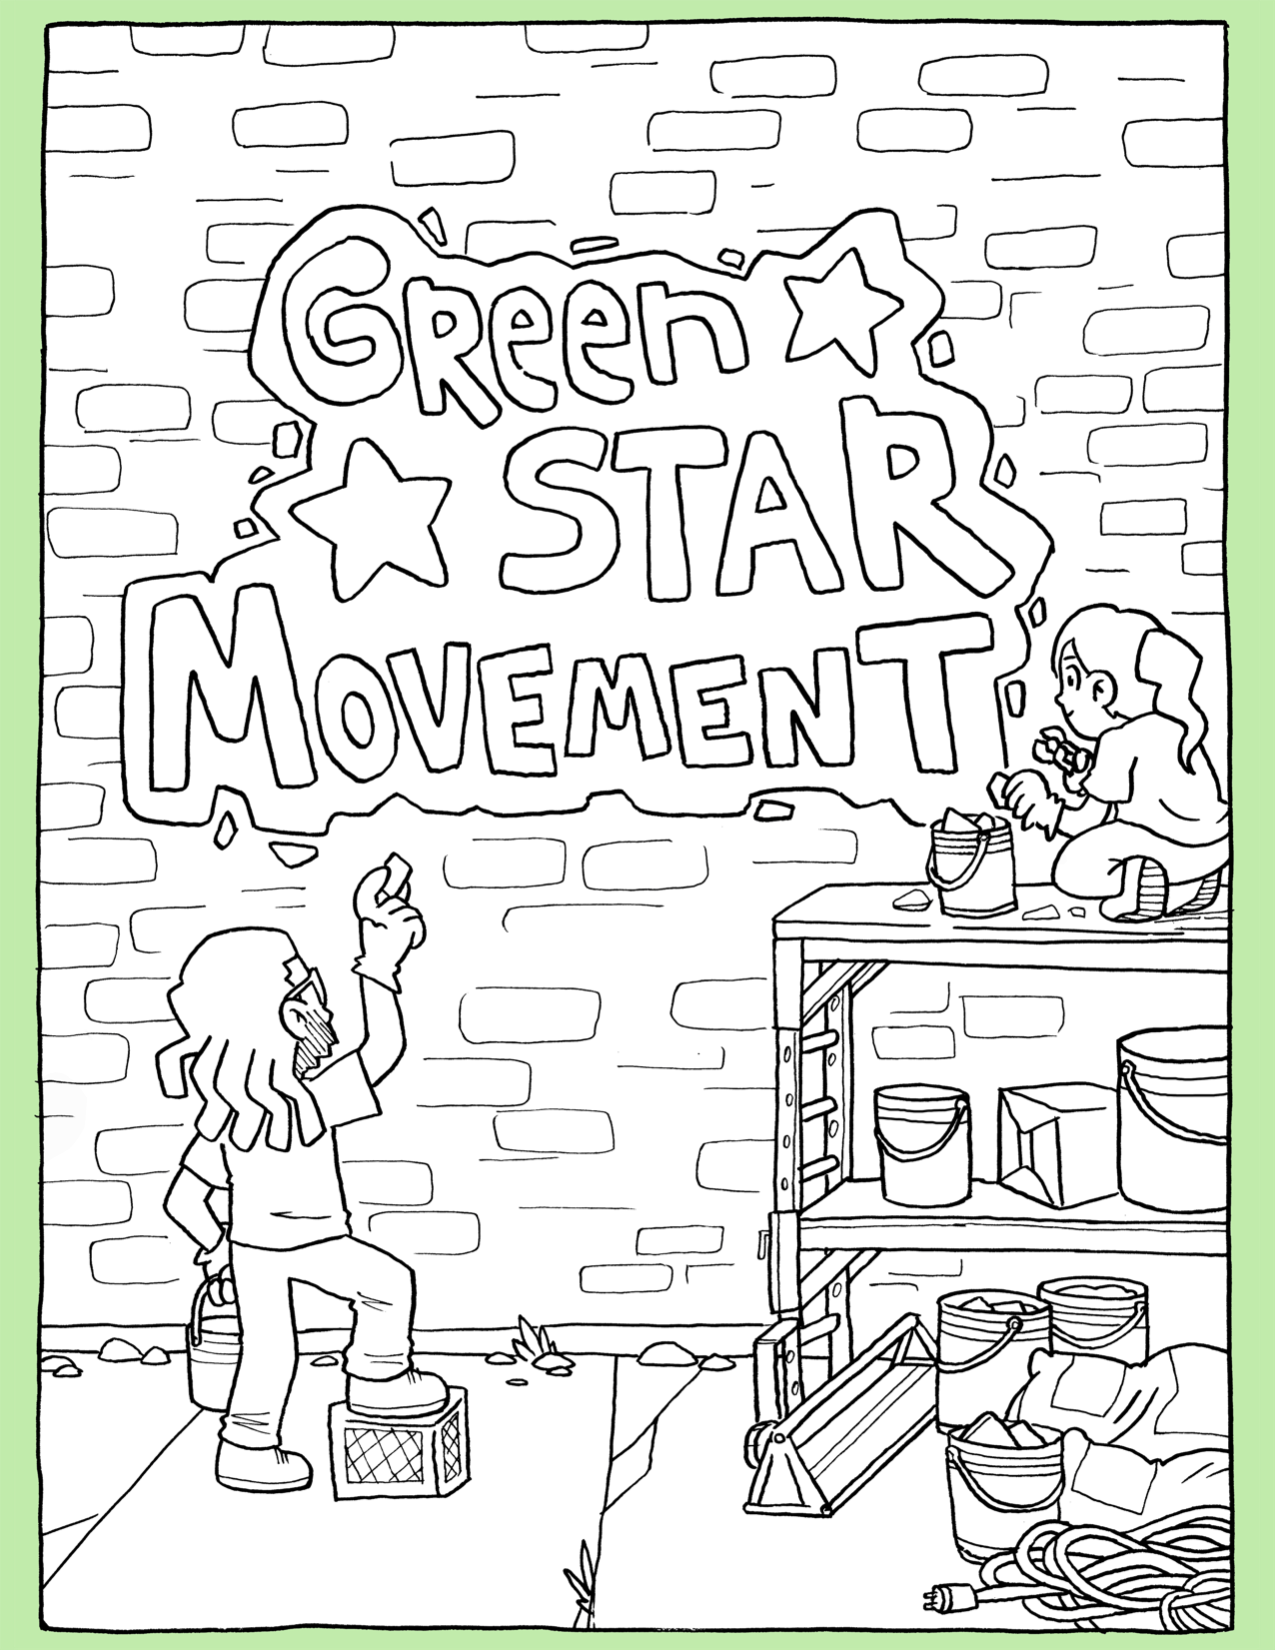 Green Star Movement Coloring Book Page 3.png